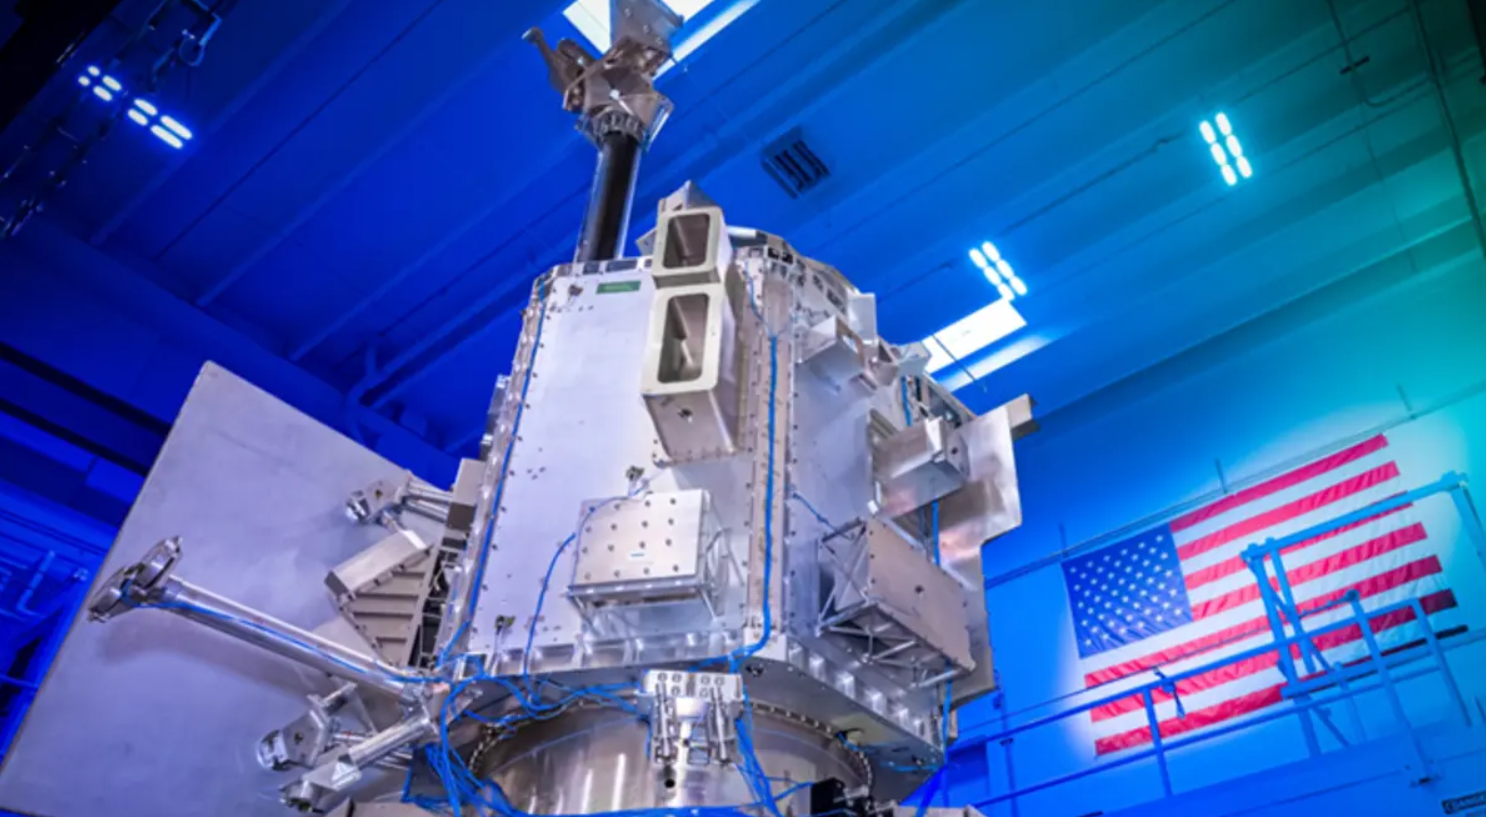 BAE Systems' Weather System Follow-on Microwave (WSF-M) satellite. The satellite appears to have a chrome silver finish, with blue wiring connecting some of its parts together. The background shows that it's displayed in a warehouse-like building with blue overhead lights. In the back, a Unites States flag can be seen displayed on a wall.